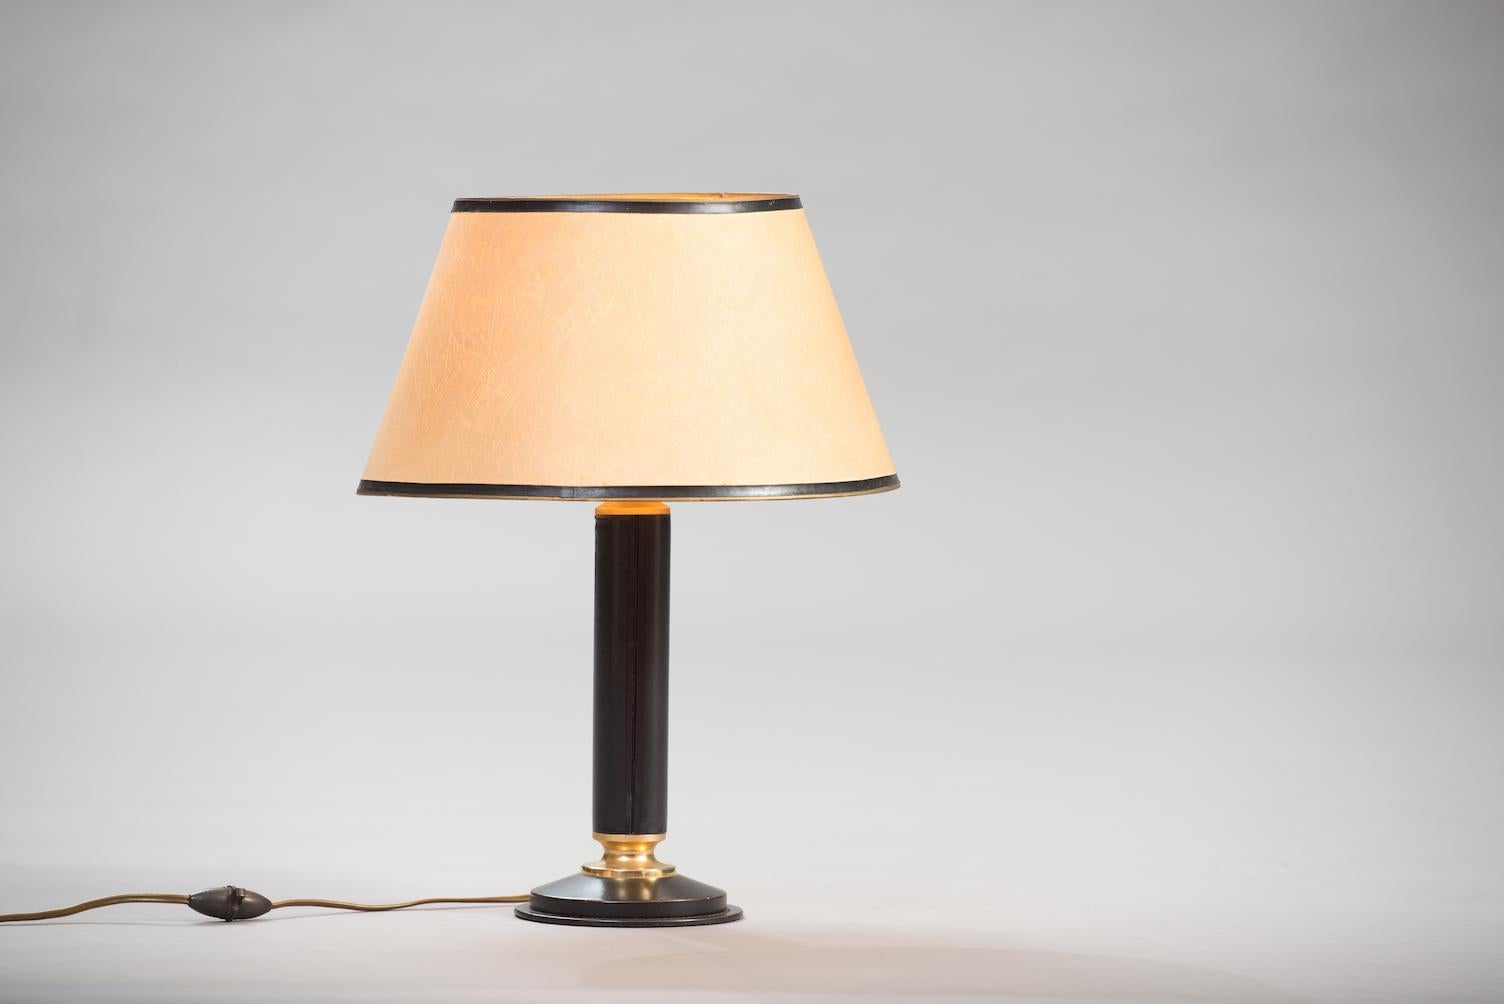 Mid-Century Modern table lamp, black leather and brass base, parchment paper shade.
Measures: Diameter 35 cm (shade), height 46 cm.